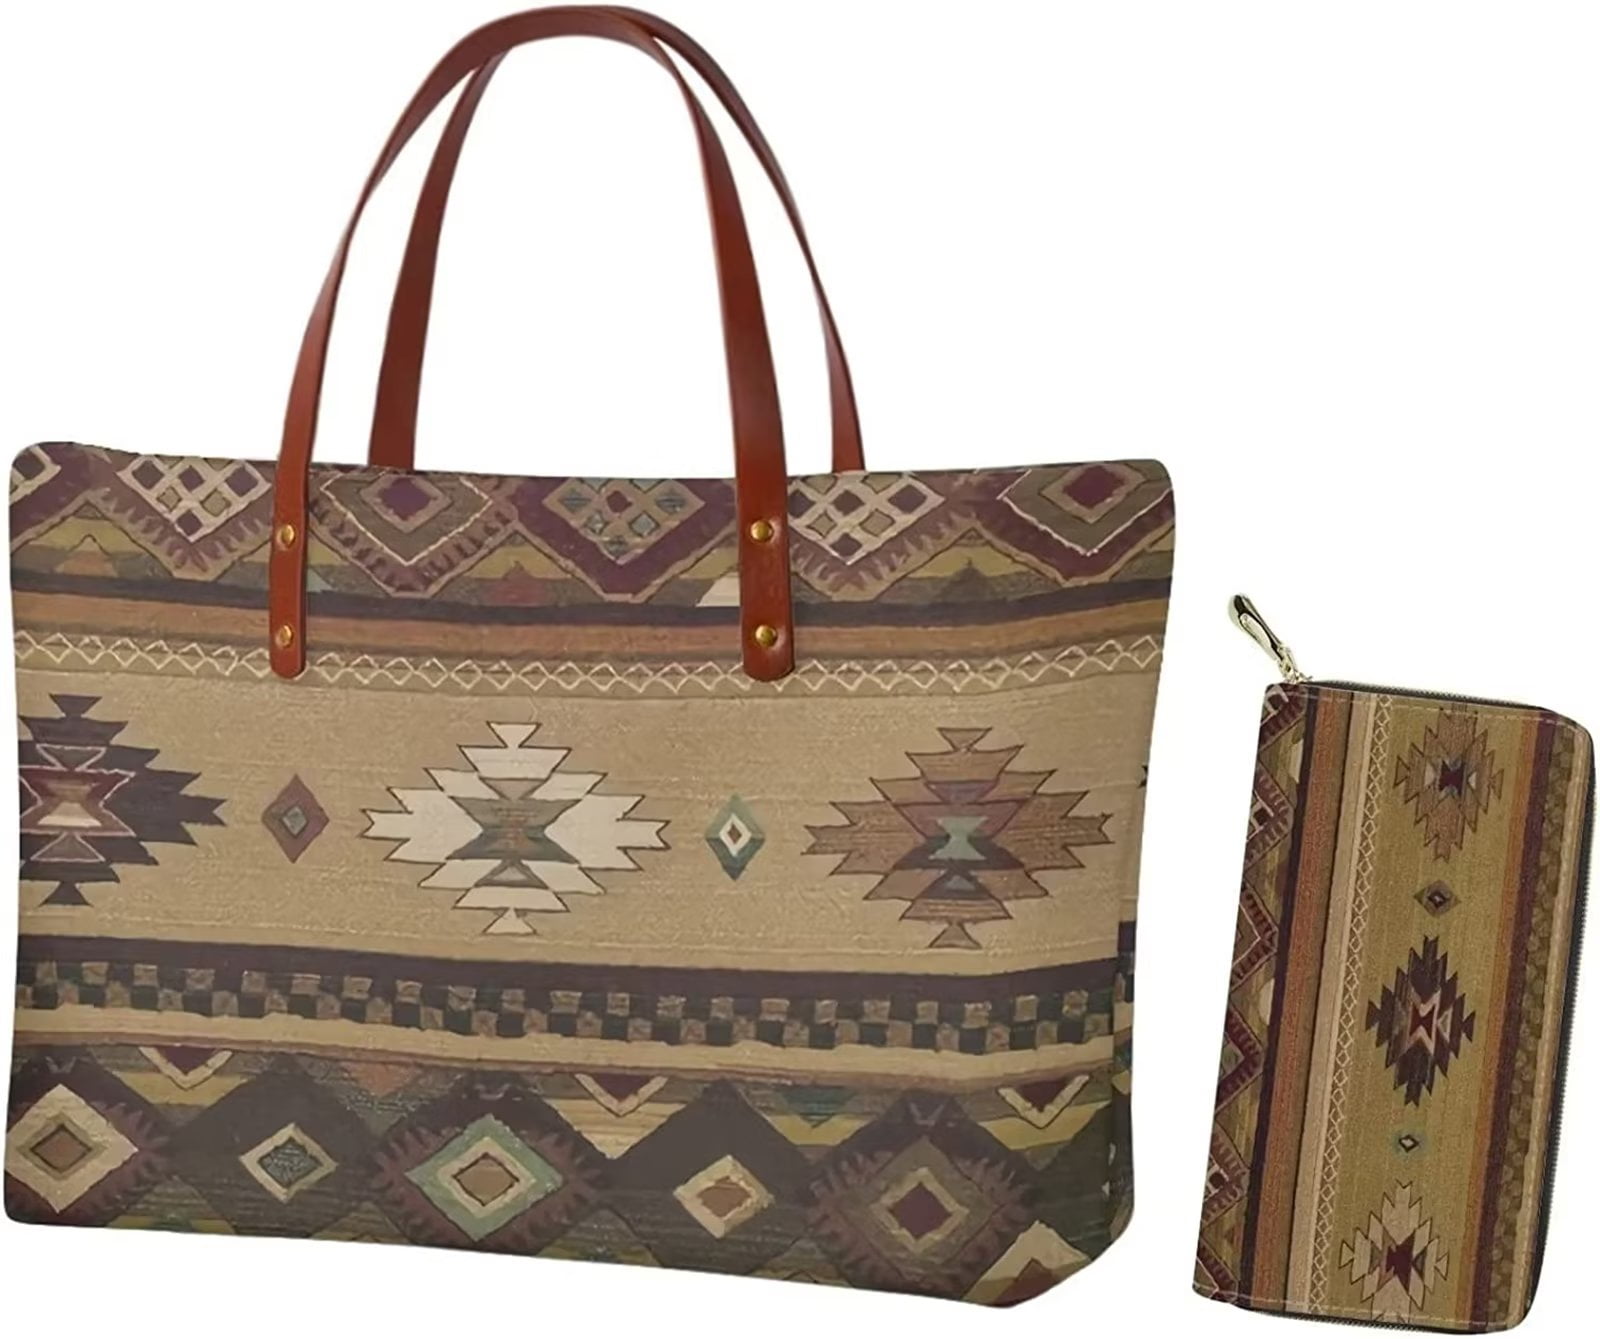 Ethnic Leather Bags - Native American